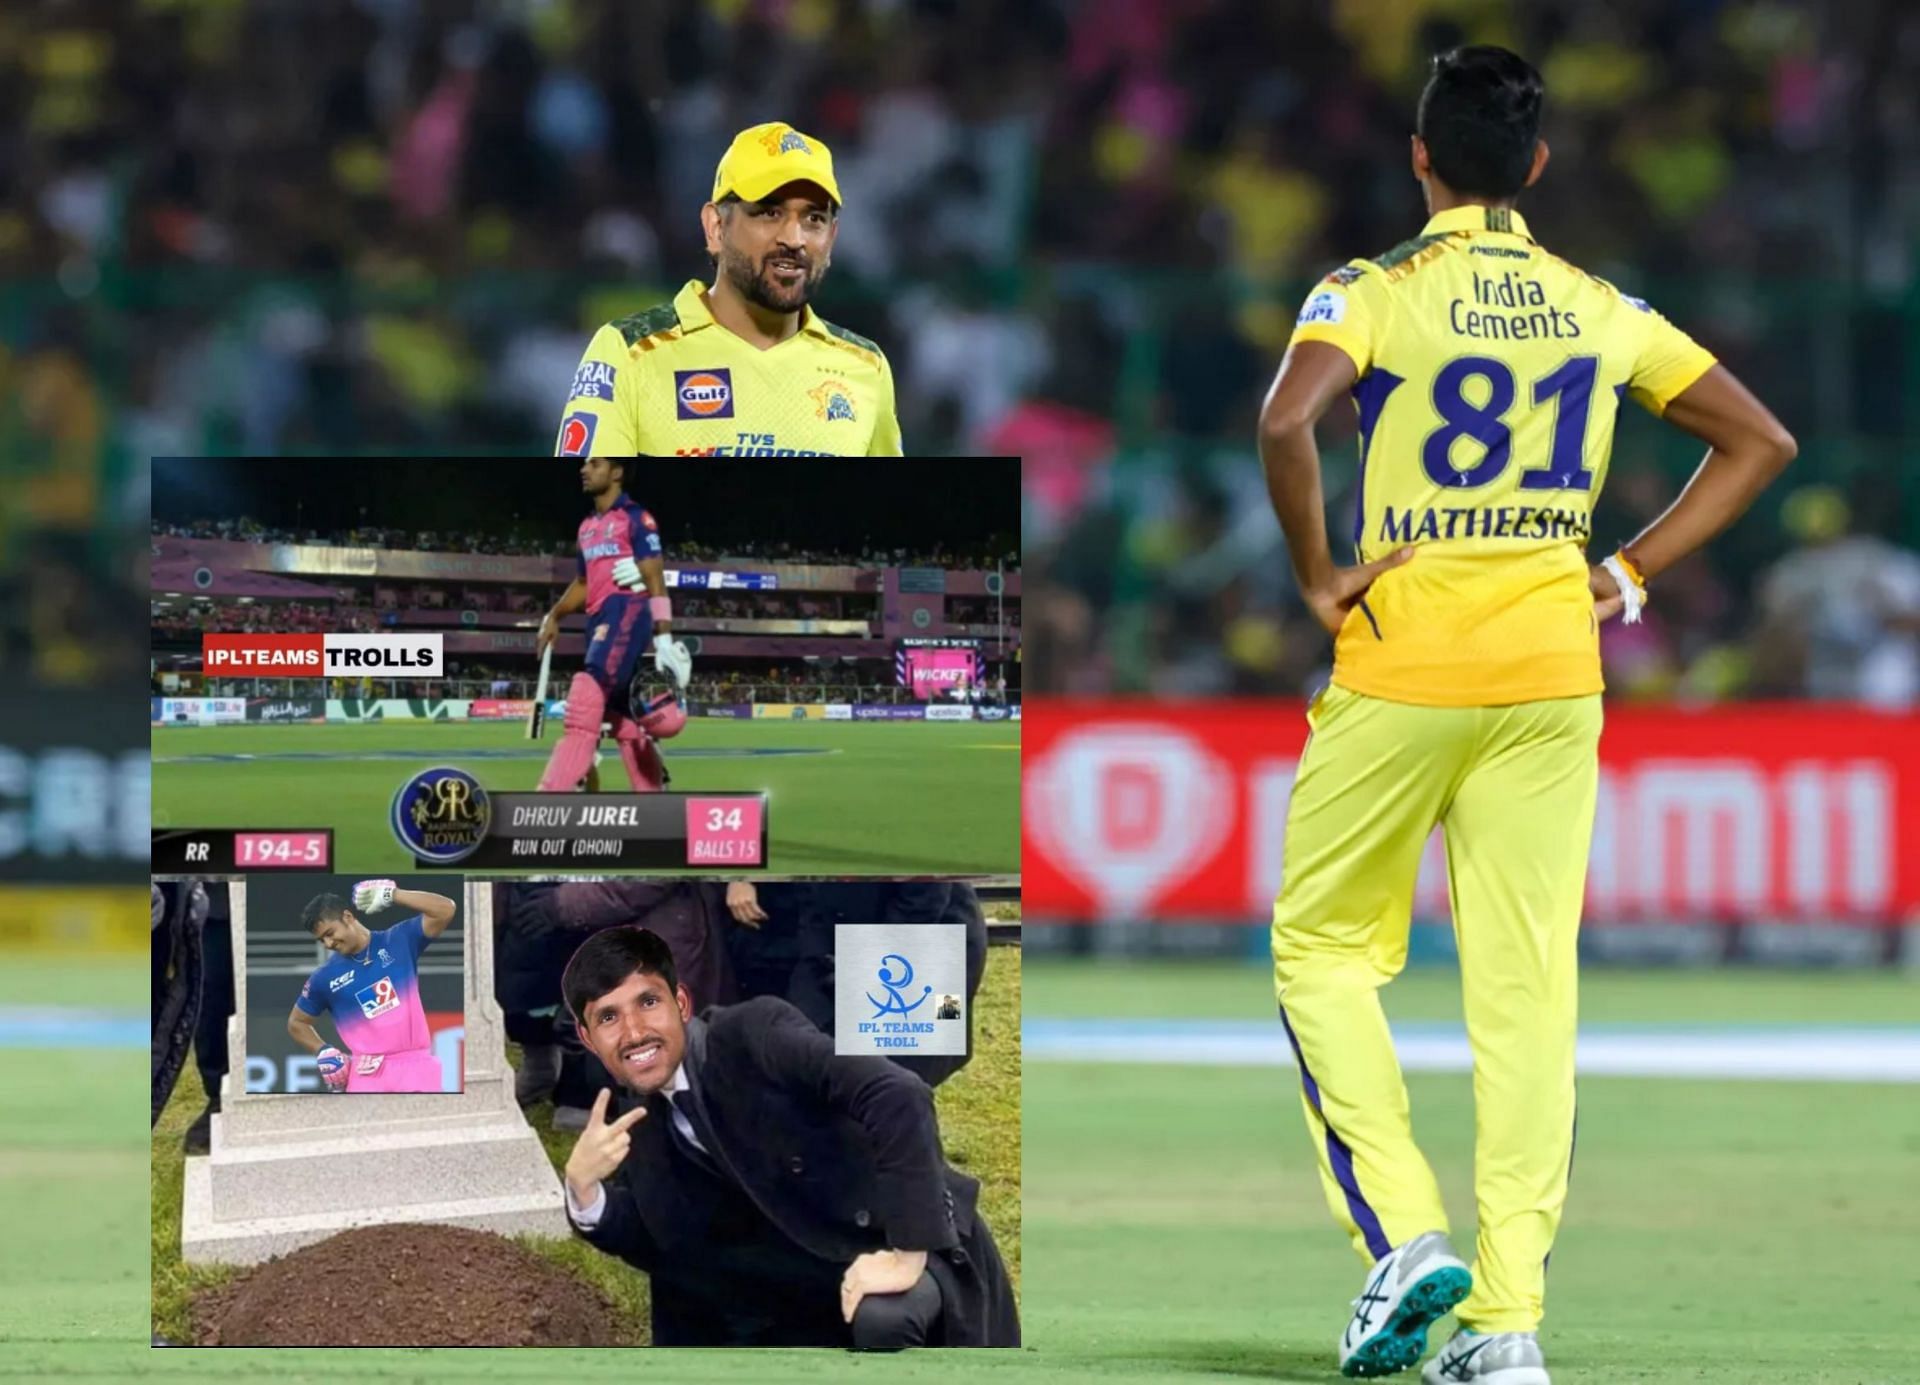 Top 10 funny memes from the first innings of the latest match